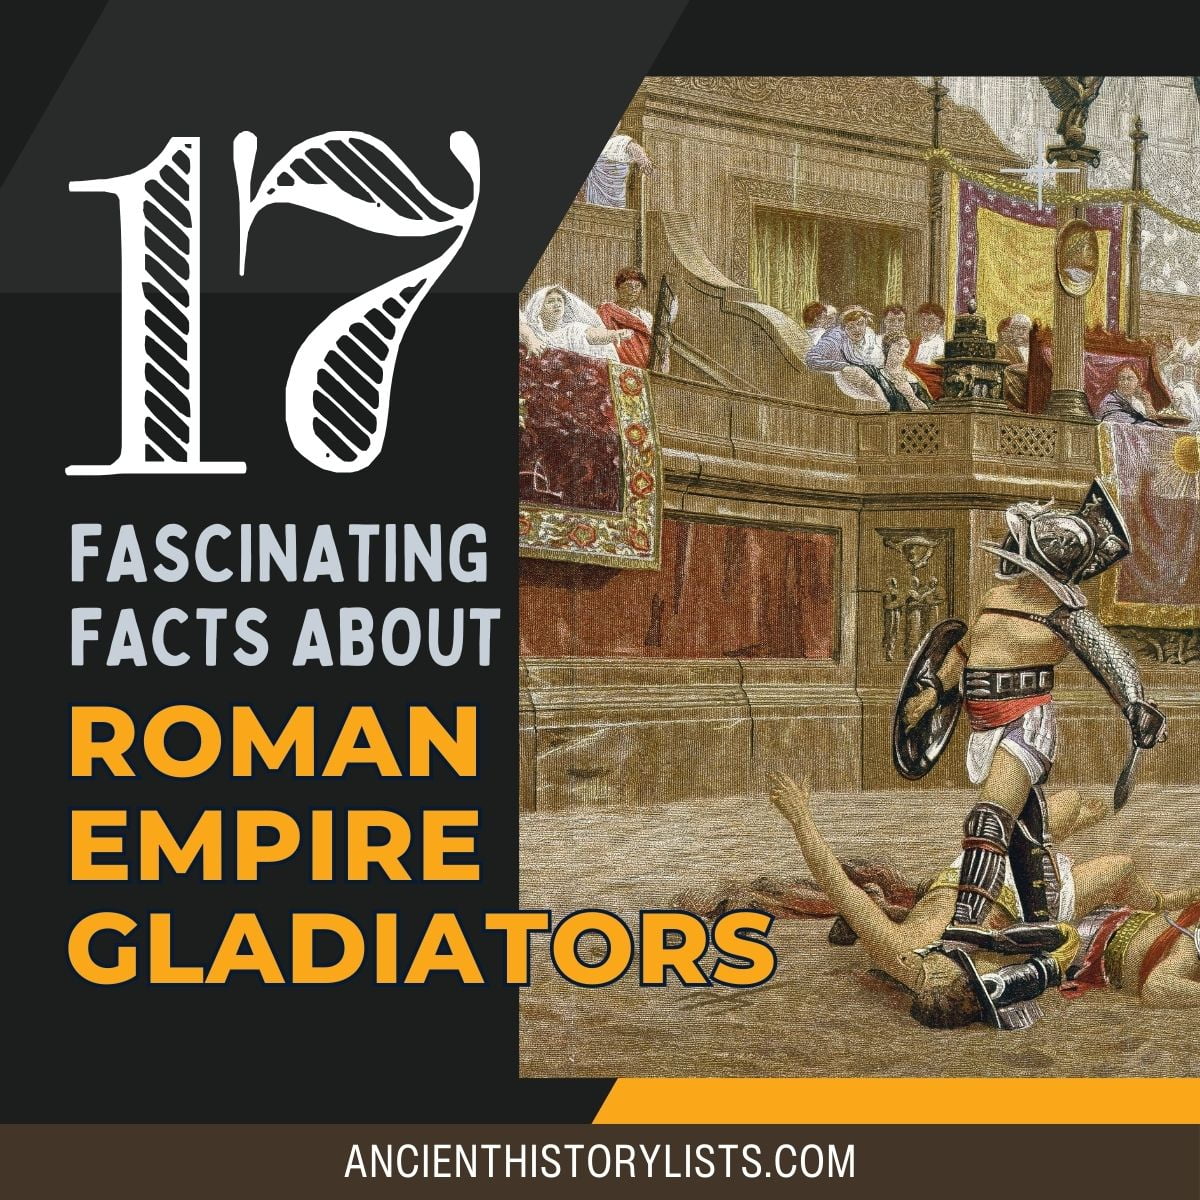 Facts about Gladiators in the Roman Empire